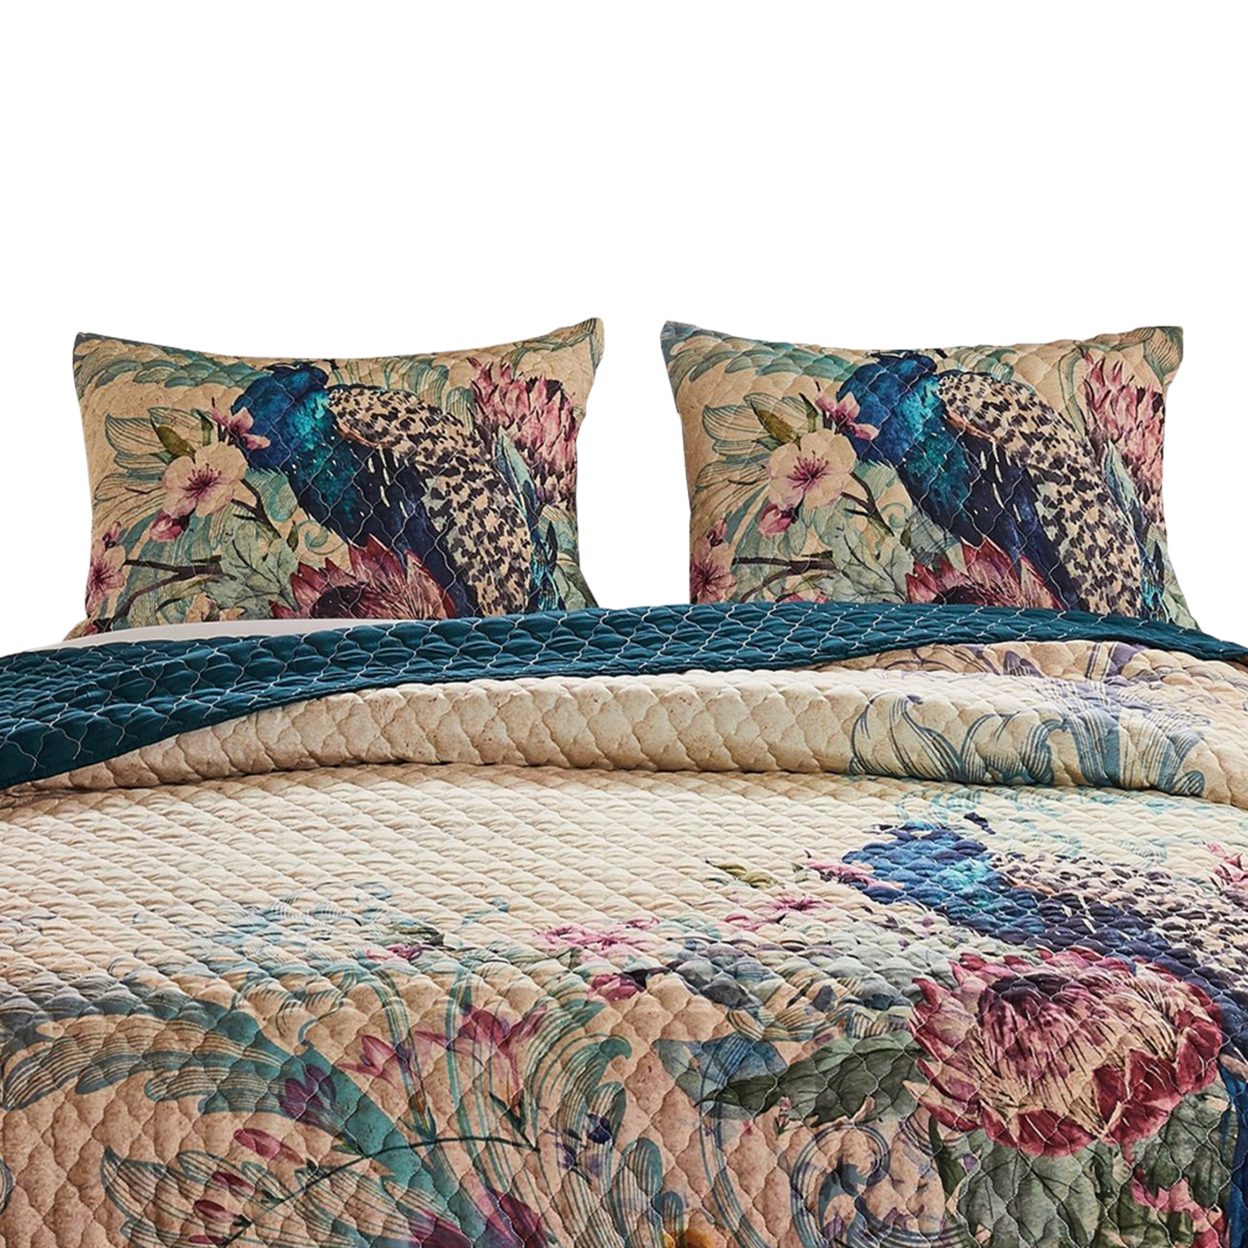 3 Piece King Size Quilt Set With Floral Print And Crochet Trim, Multicolor- Saltoro Sherpi